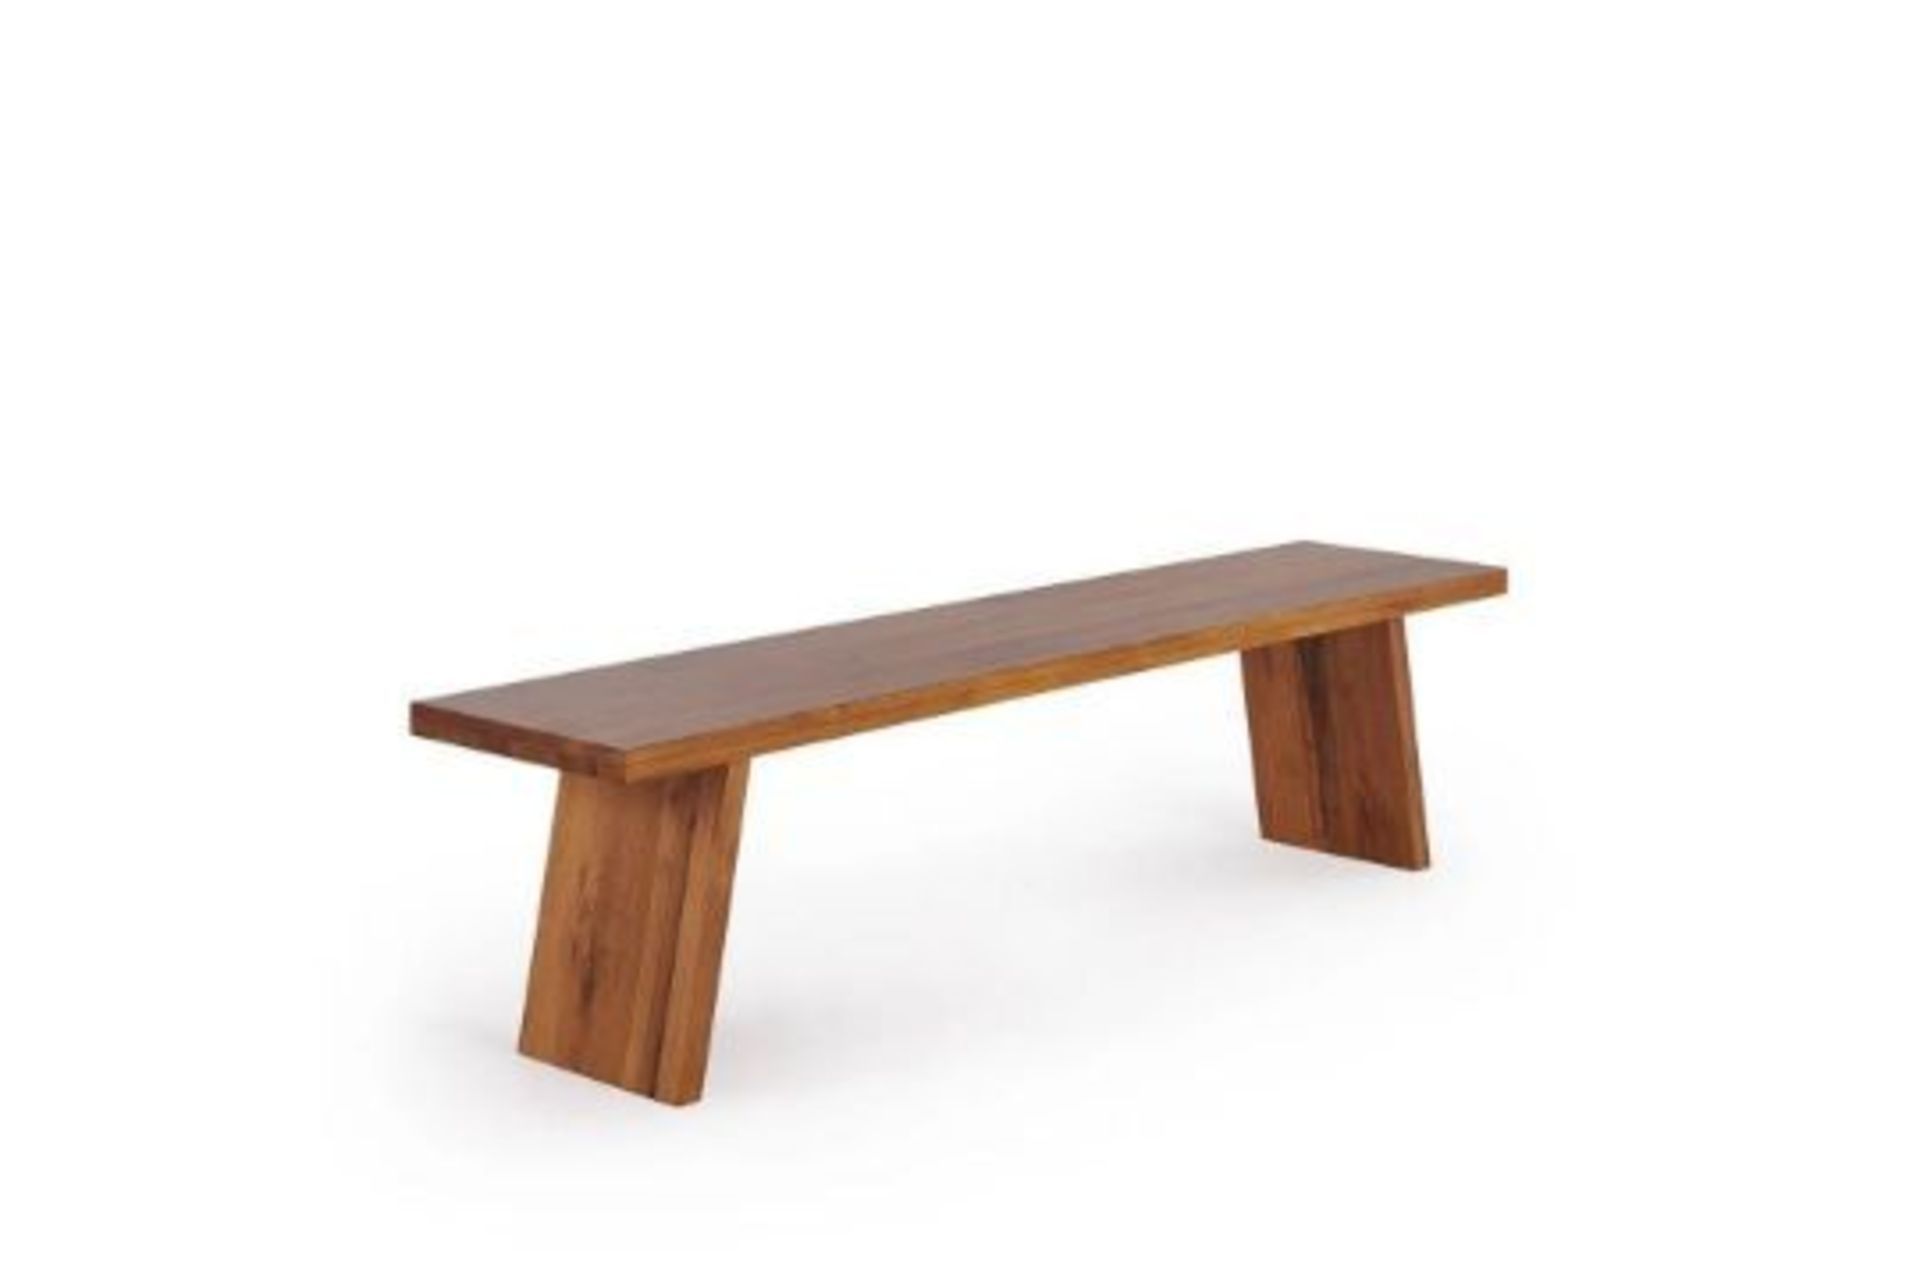 New Boxed - Cantilever Natural Solid Oak Bench. 180cm Long. RRP £330.. For a more open seating